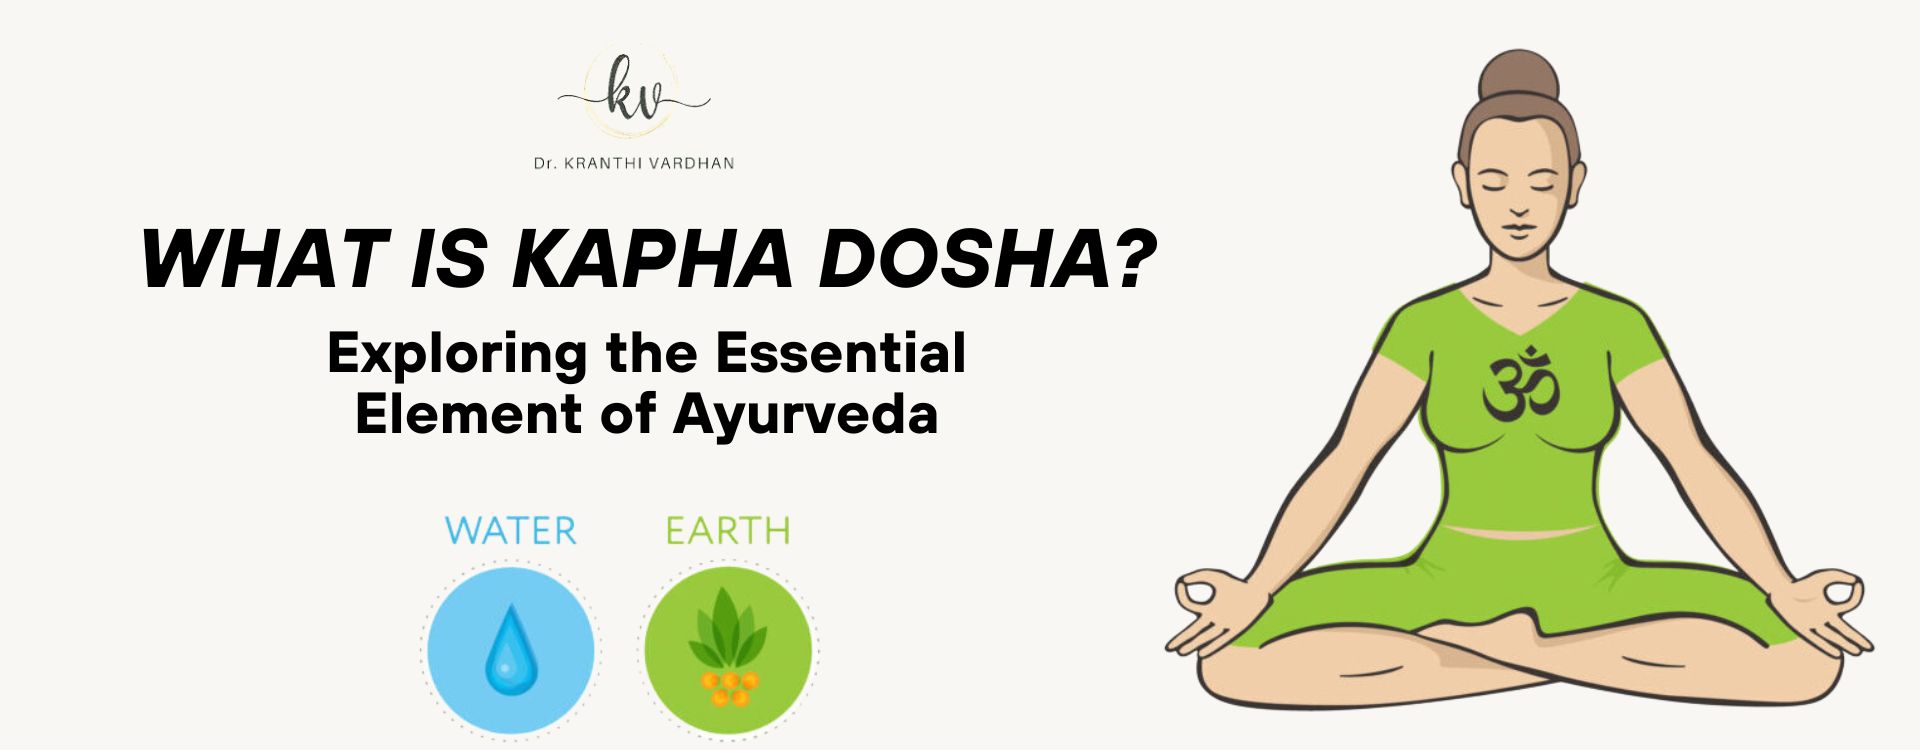 What is Kapha Dosha: Exploring the Essential Element of Ayurveda